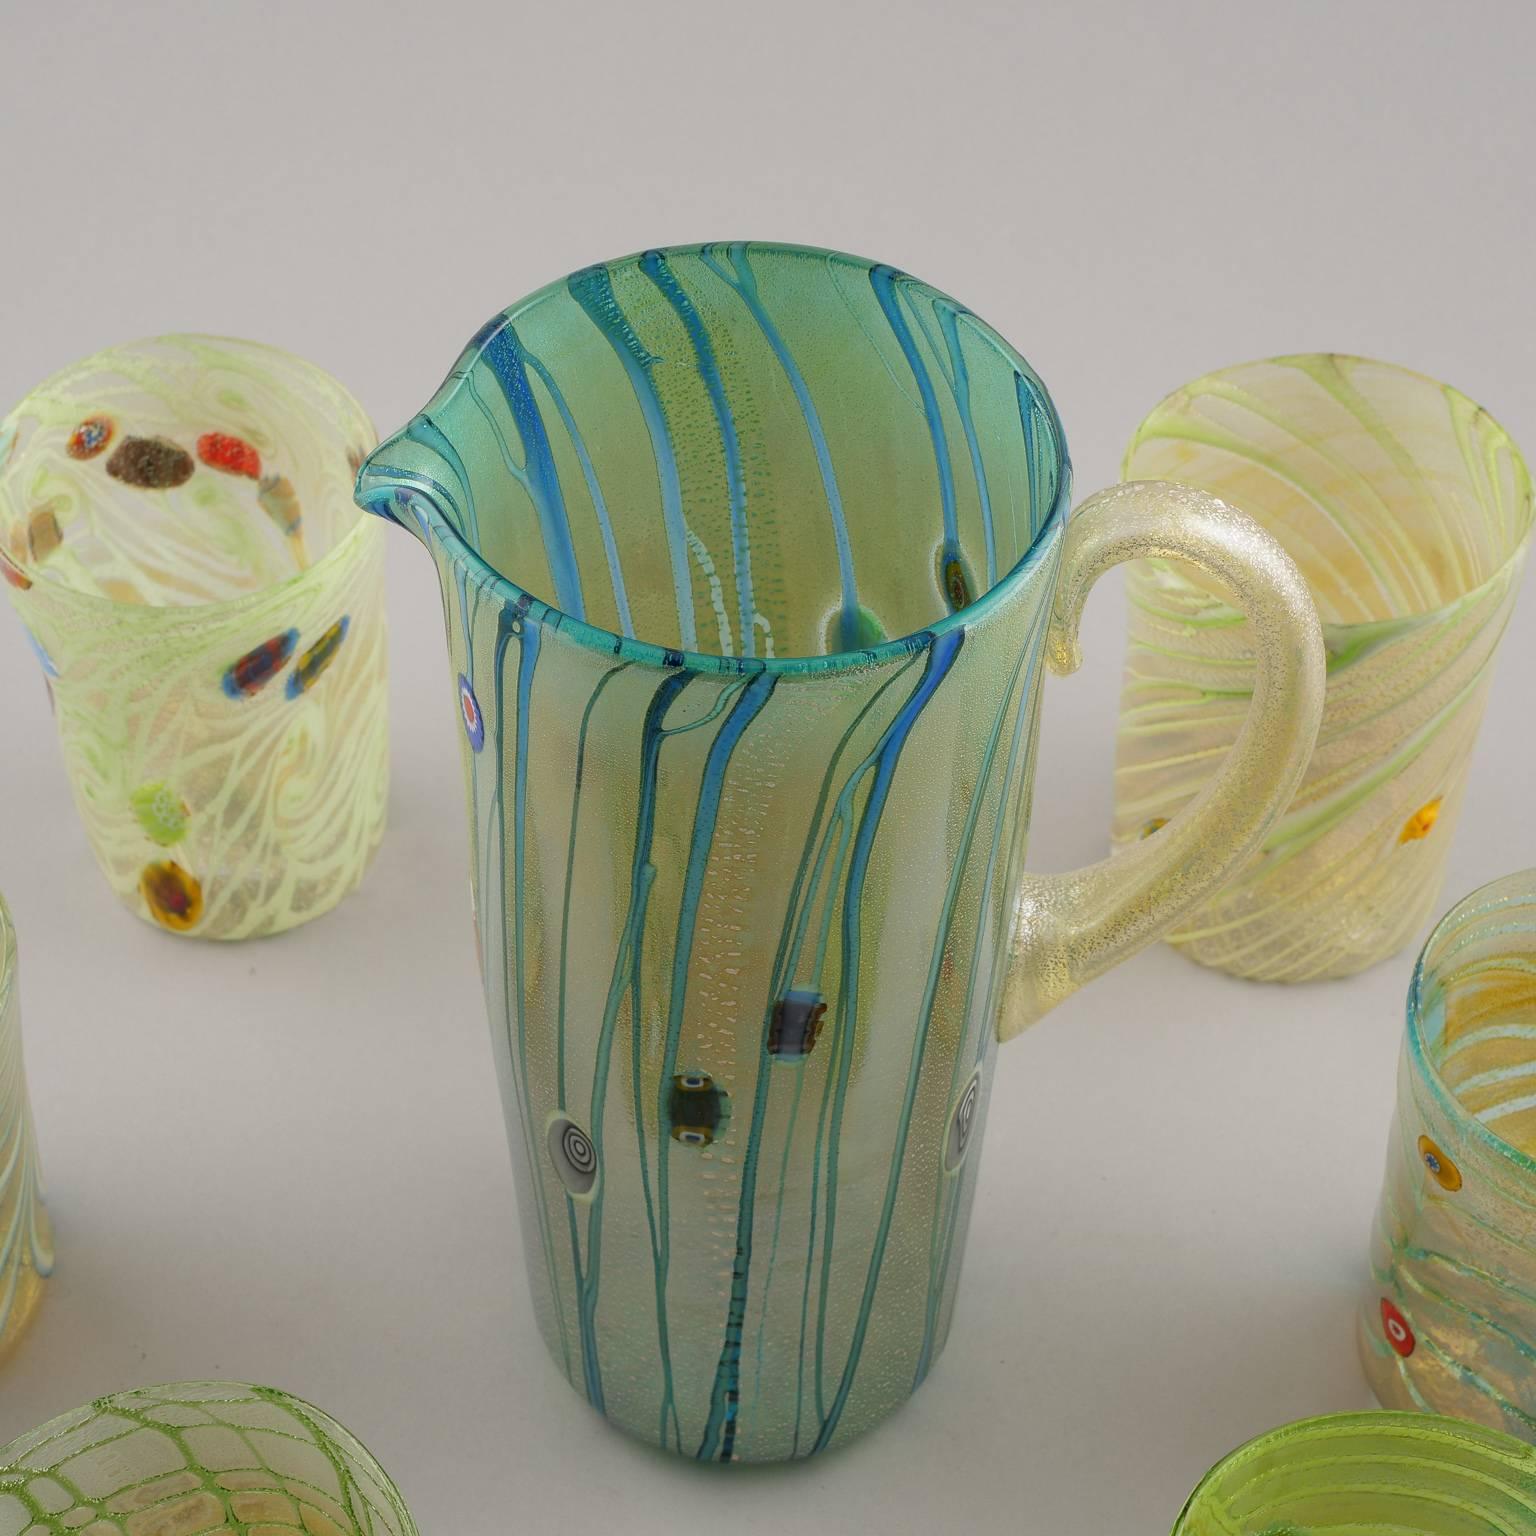 Set of contemporary Murano glass pitcher with six coordinating tumblers. Colors of set are green, yellow with streaks of blue and some ruby red floral accents and iridescent sheen. Makes a great gift!